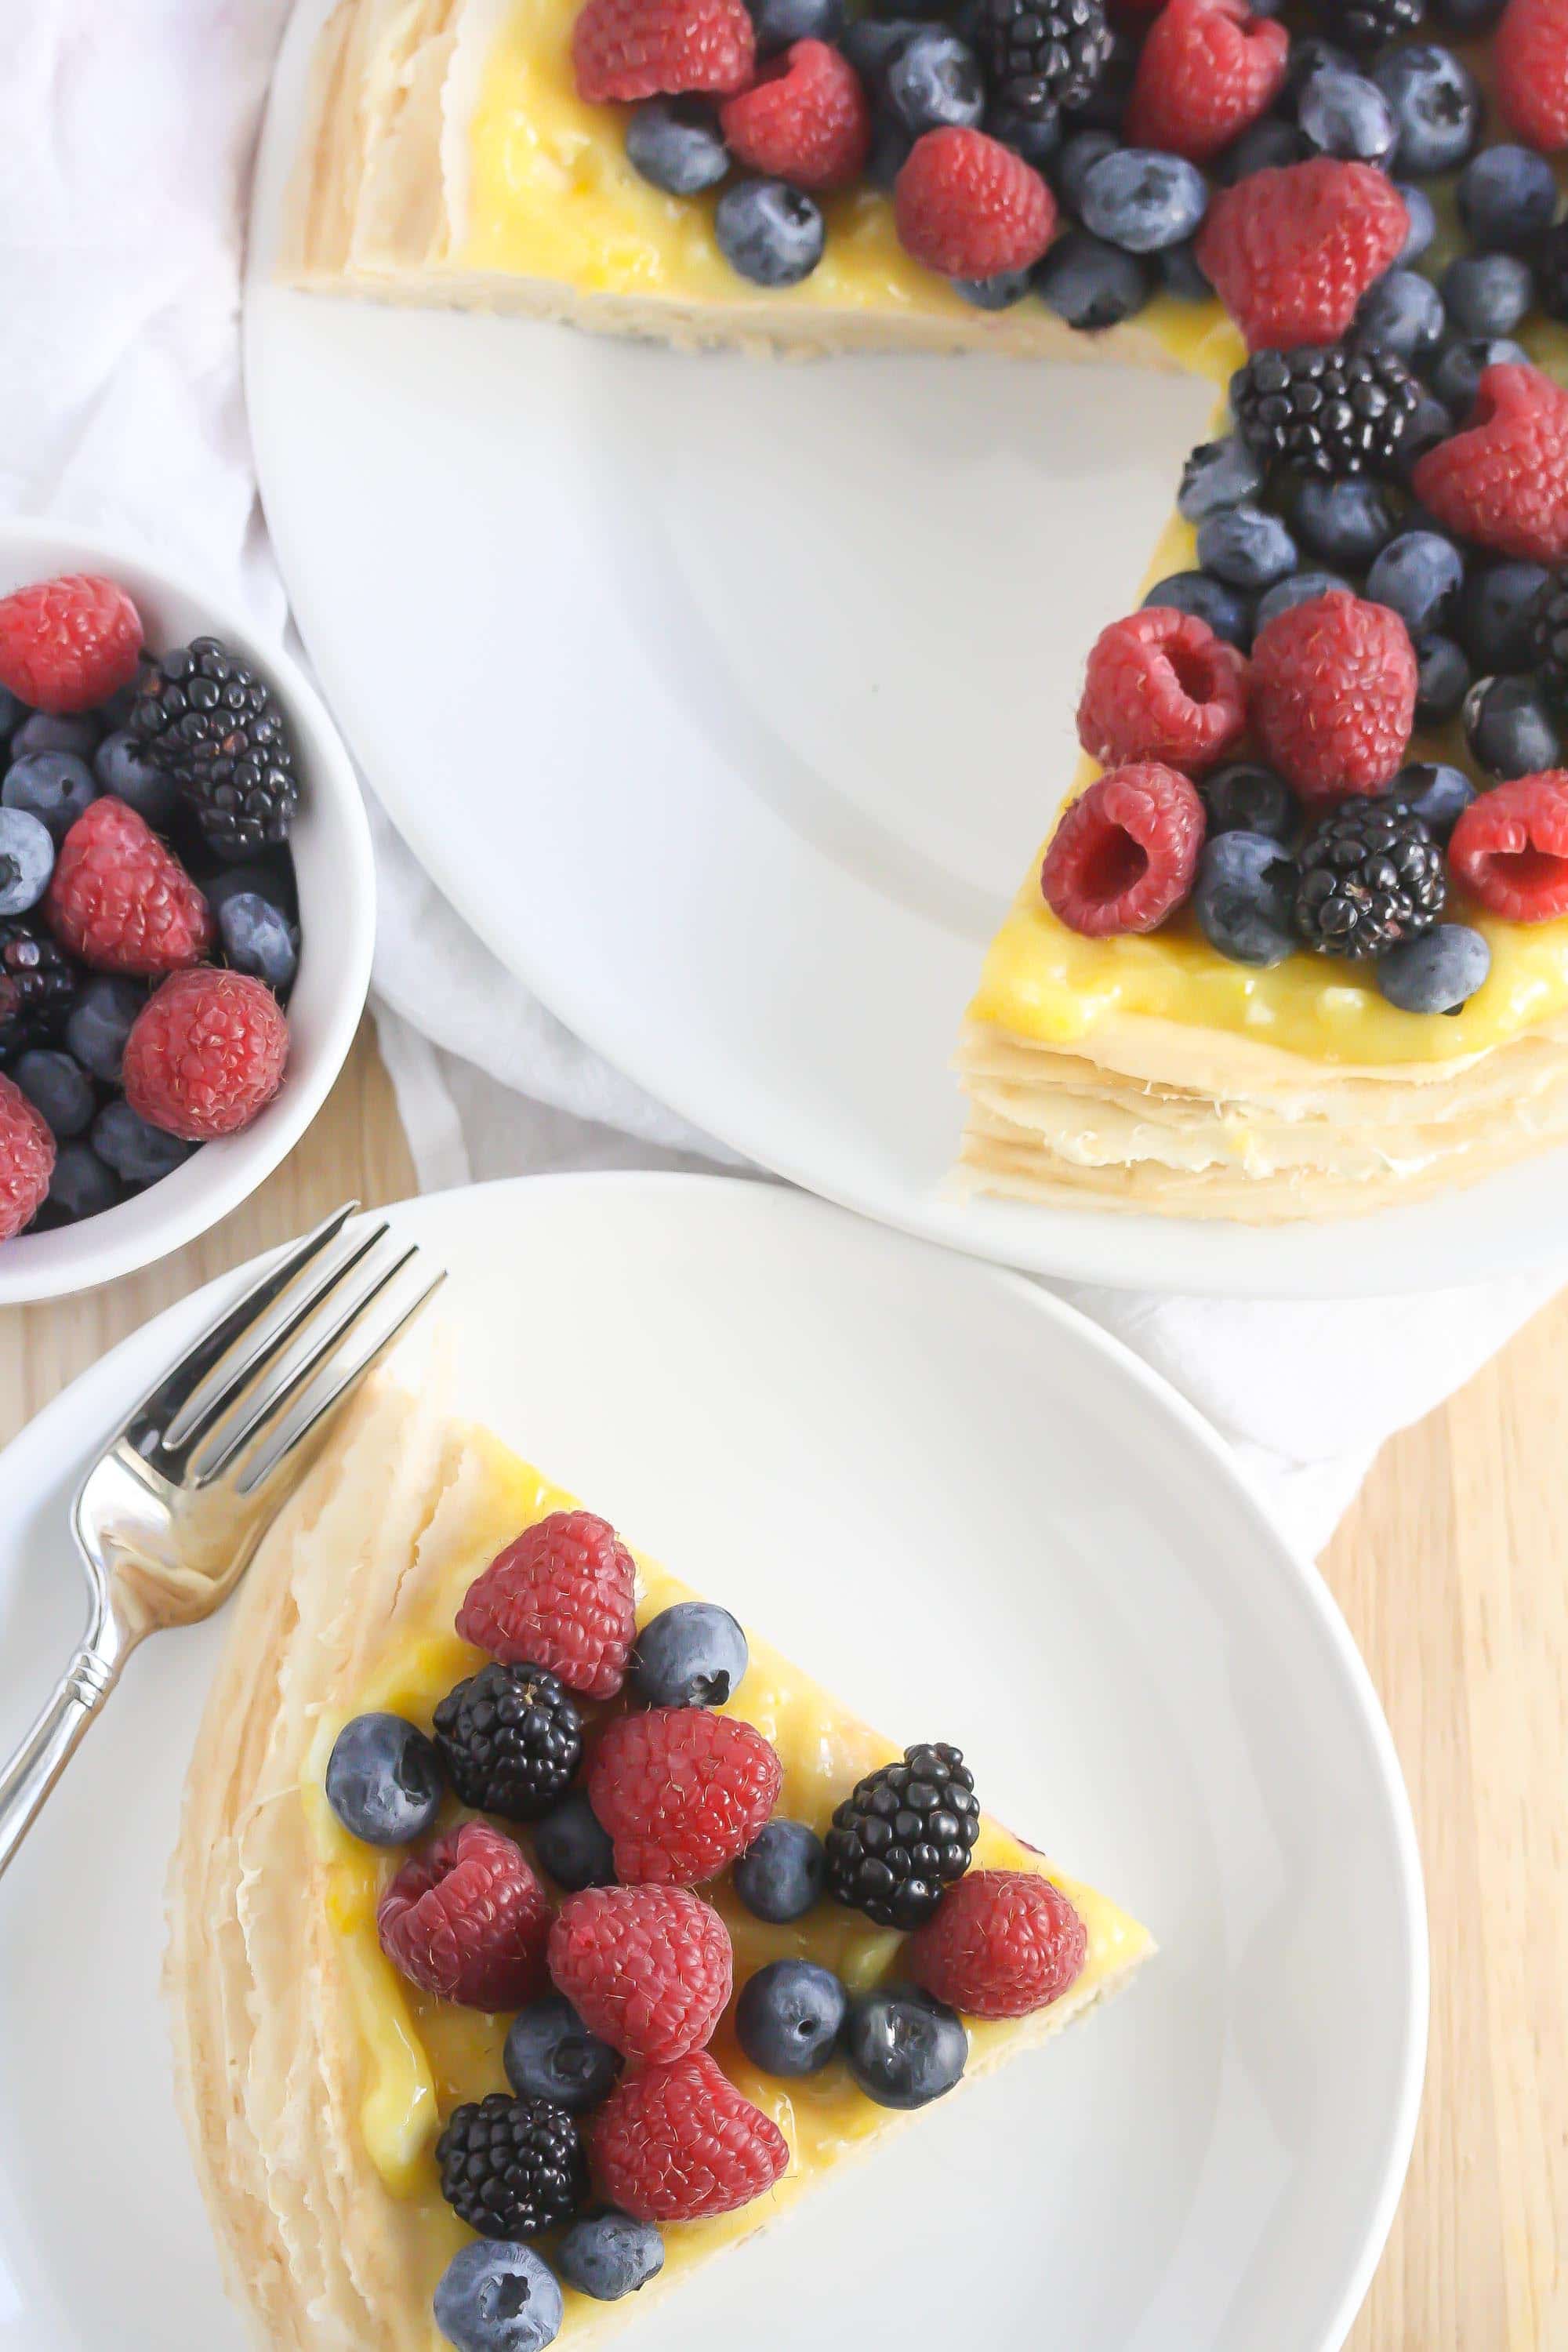 Over head view of Buttercream Crepe Cake with Lemon Curd Topping